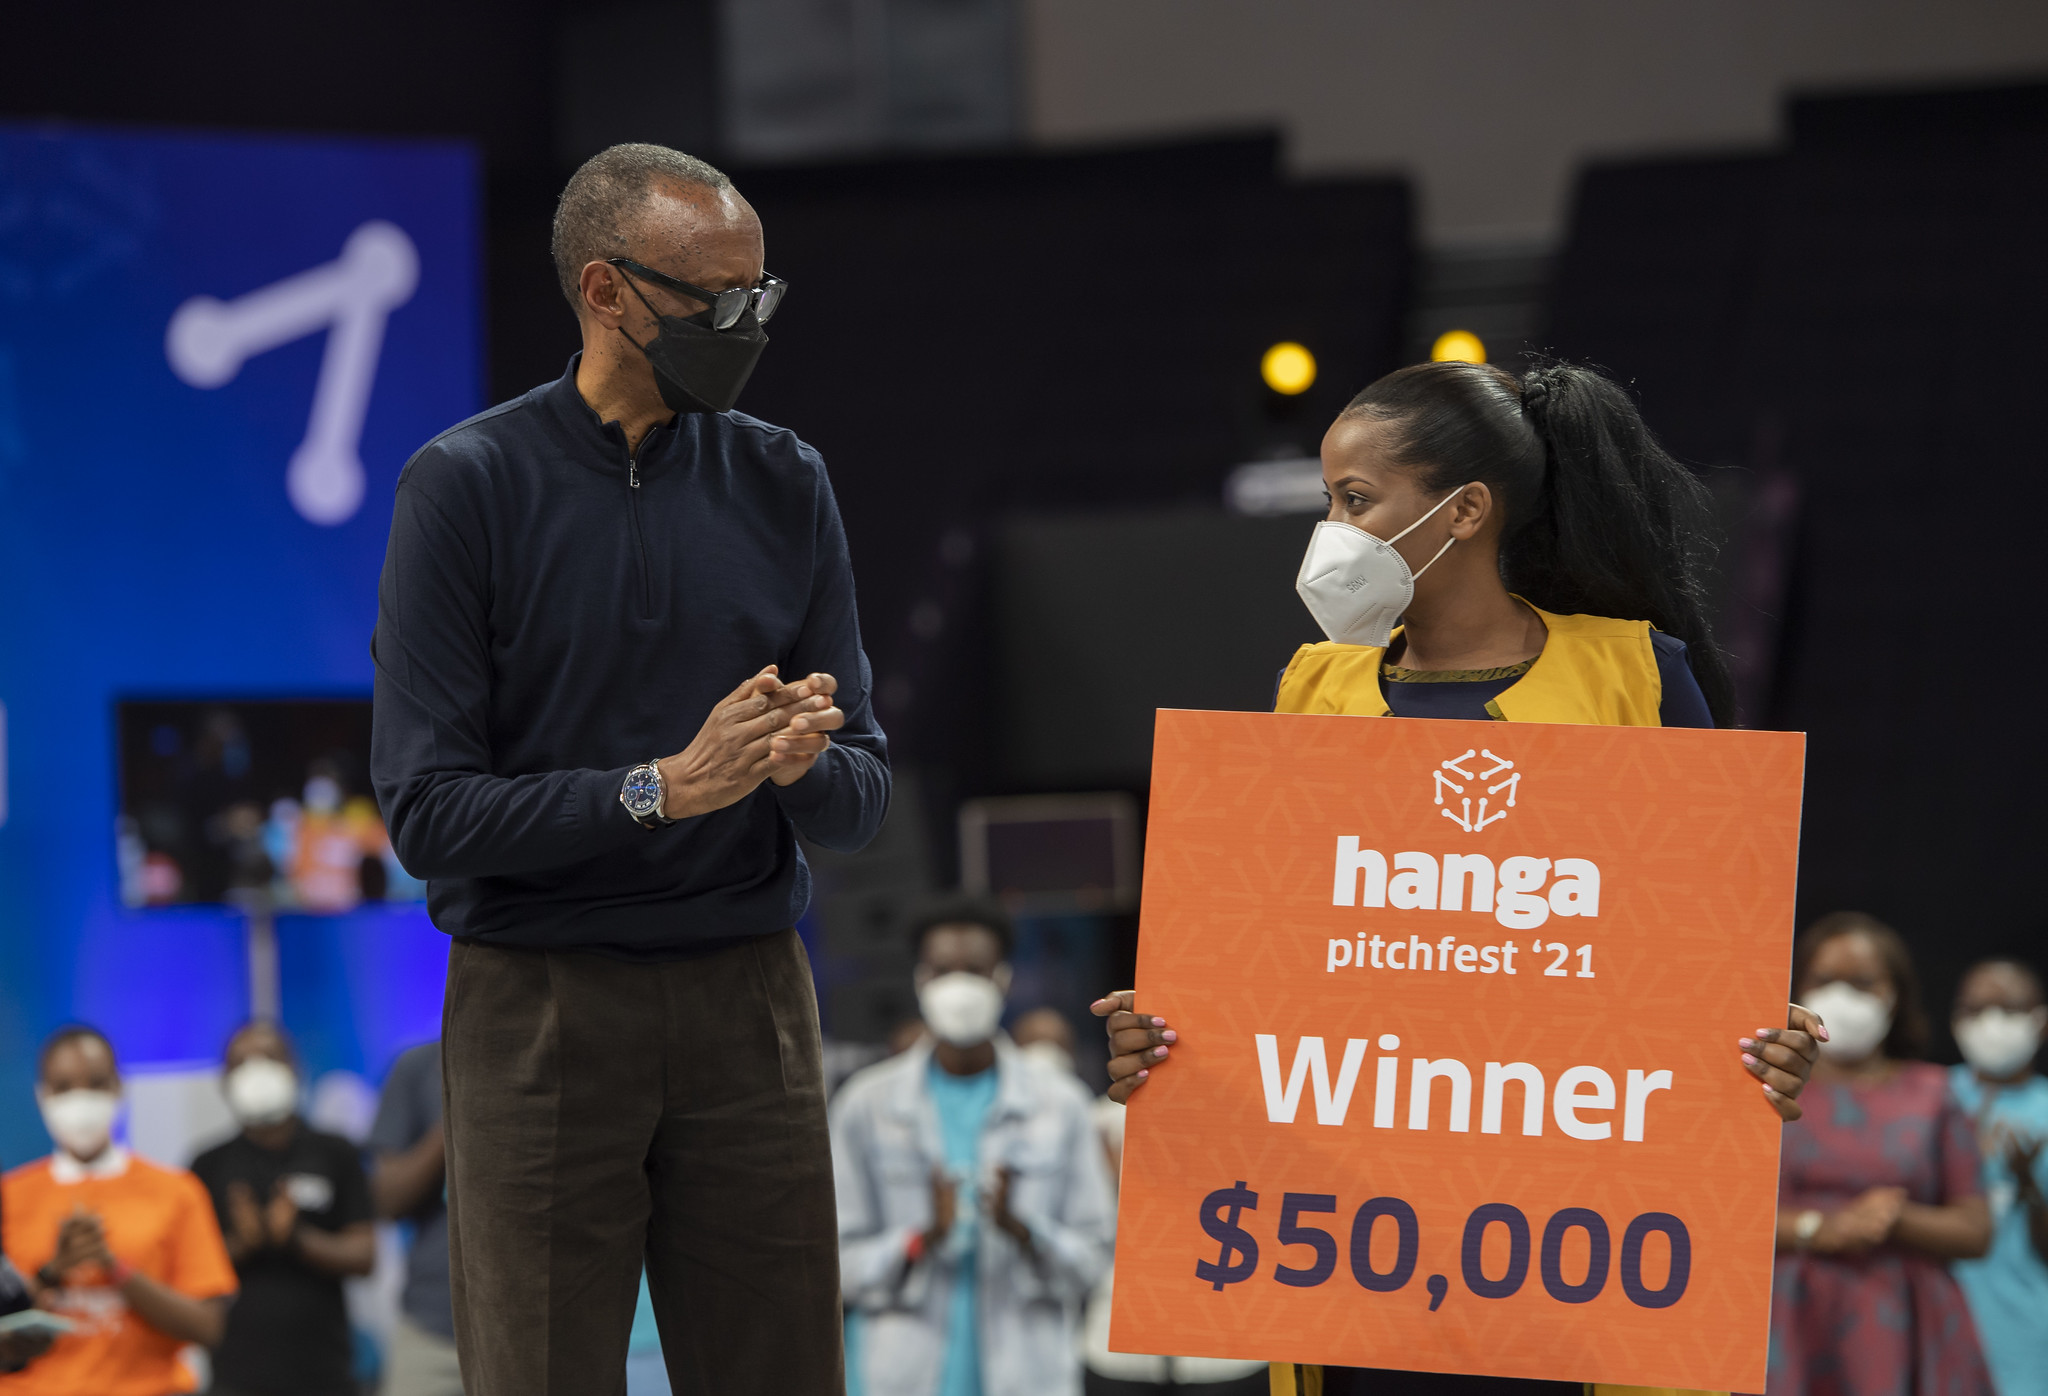 “This is Just the Beginning”- President Kagame Promises Young Entrepreneurs at First Hanga Pitch Fest